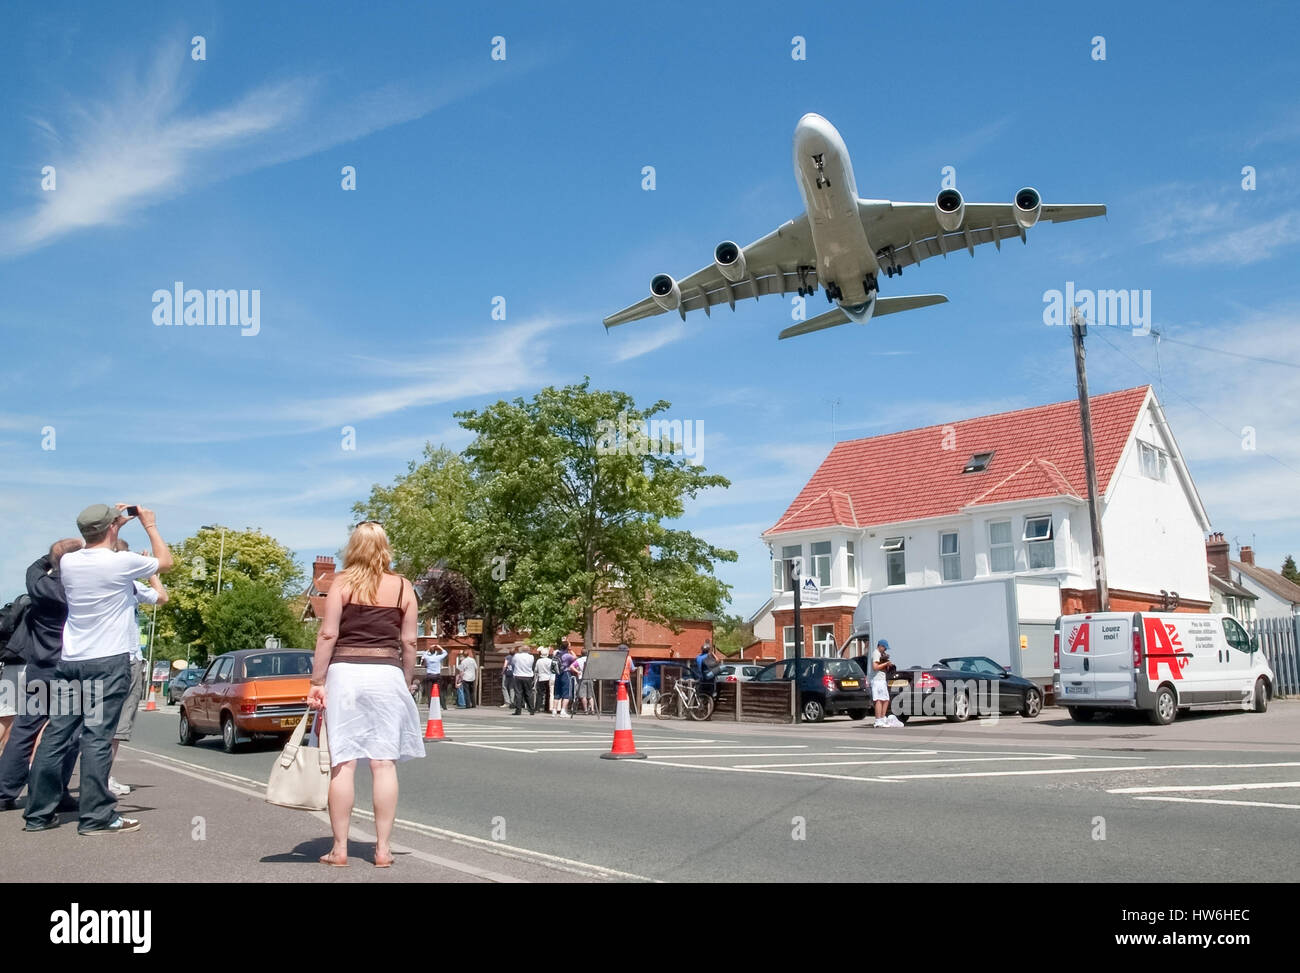 Massive Airbus A380 aircraft on landing approach over local suburban street and arriving at the Farnborough Airshow, Stock Photo